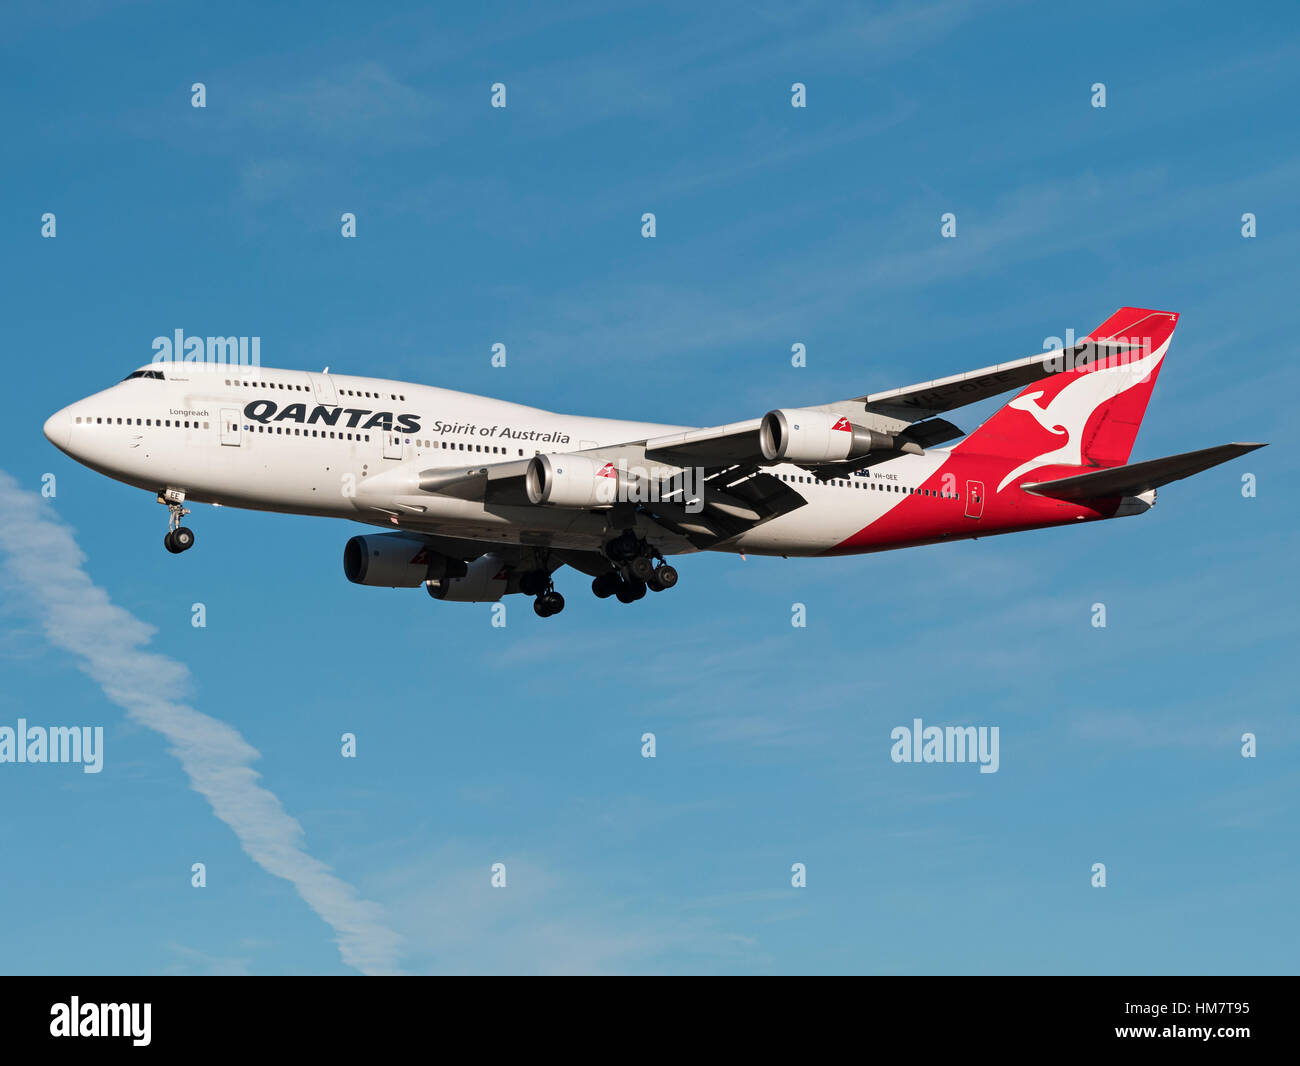 Qantas plane airplane  Boeing 747 (747-438ER) wide-body jumbo jet airliner  final approach landing  Vancouver International Airport Stock Photo